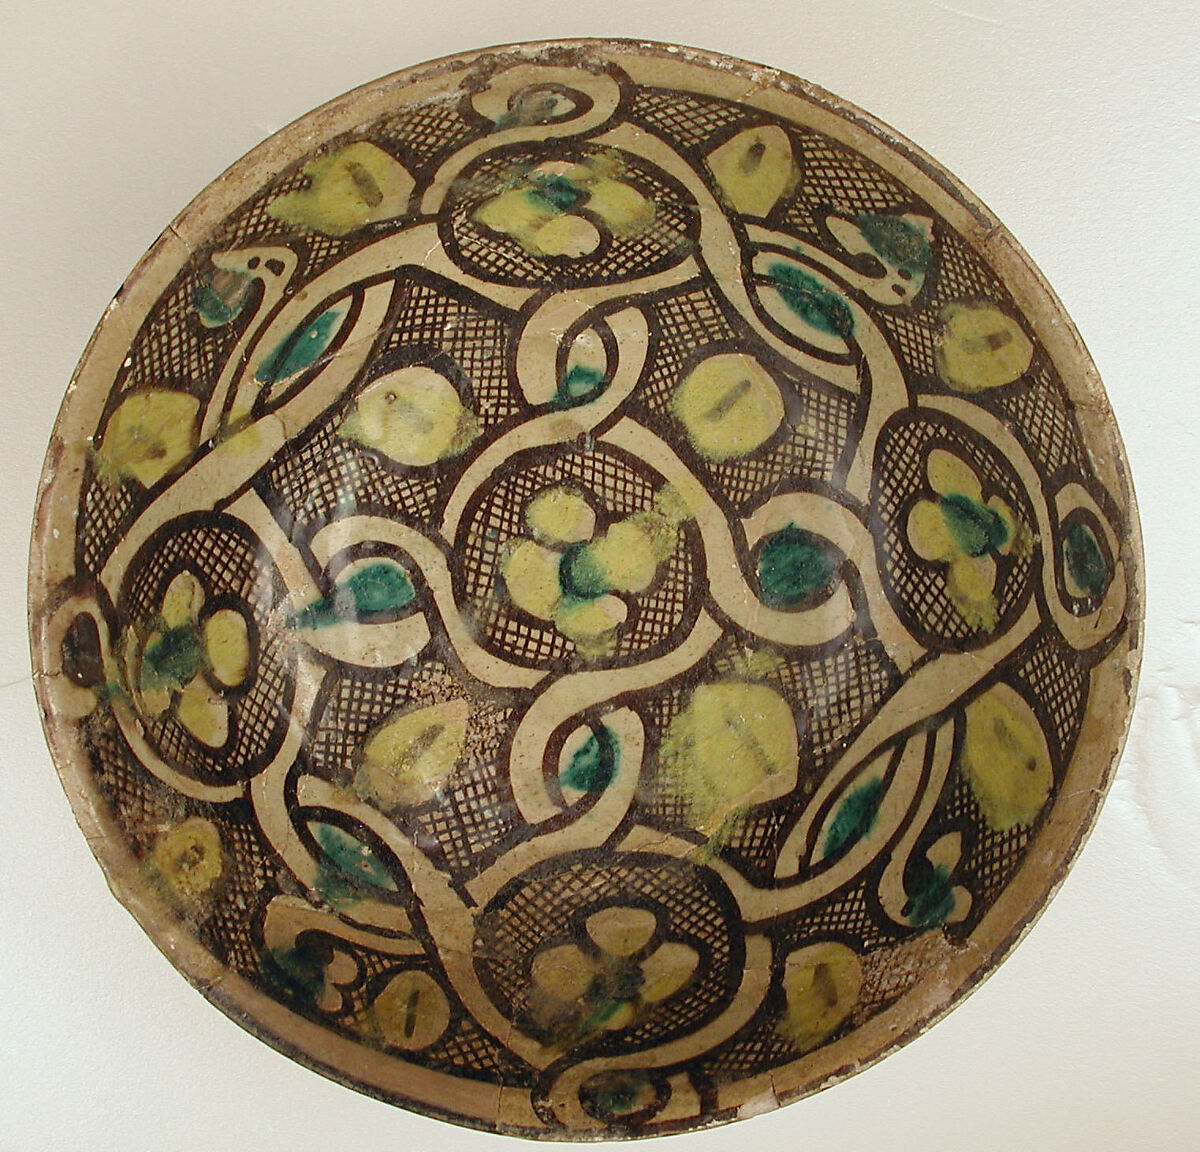 Bowl with Interlace Pattern and Yellow Flowers, Earthenware; polychrome decoration under transparent glaze (buff ware)